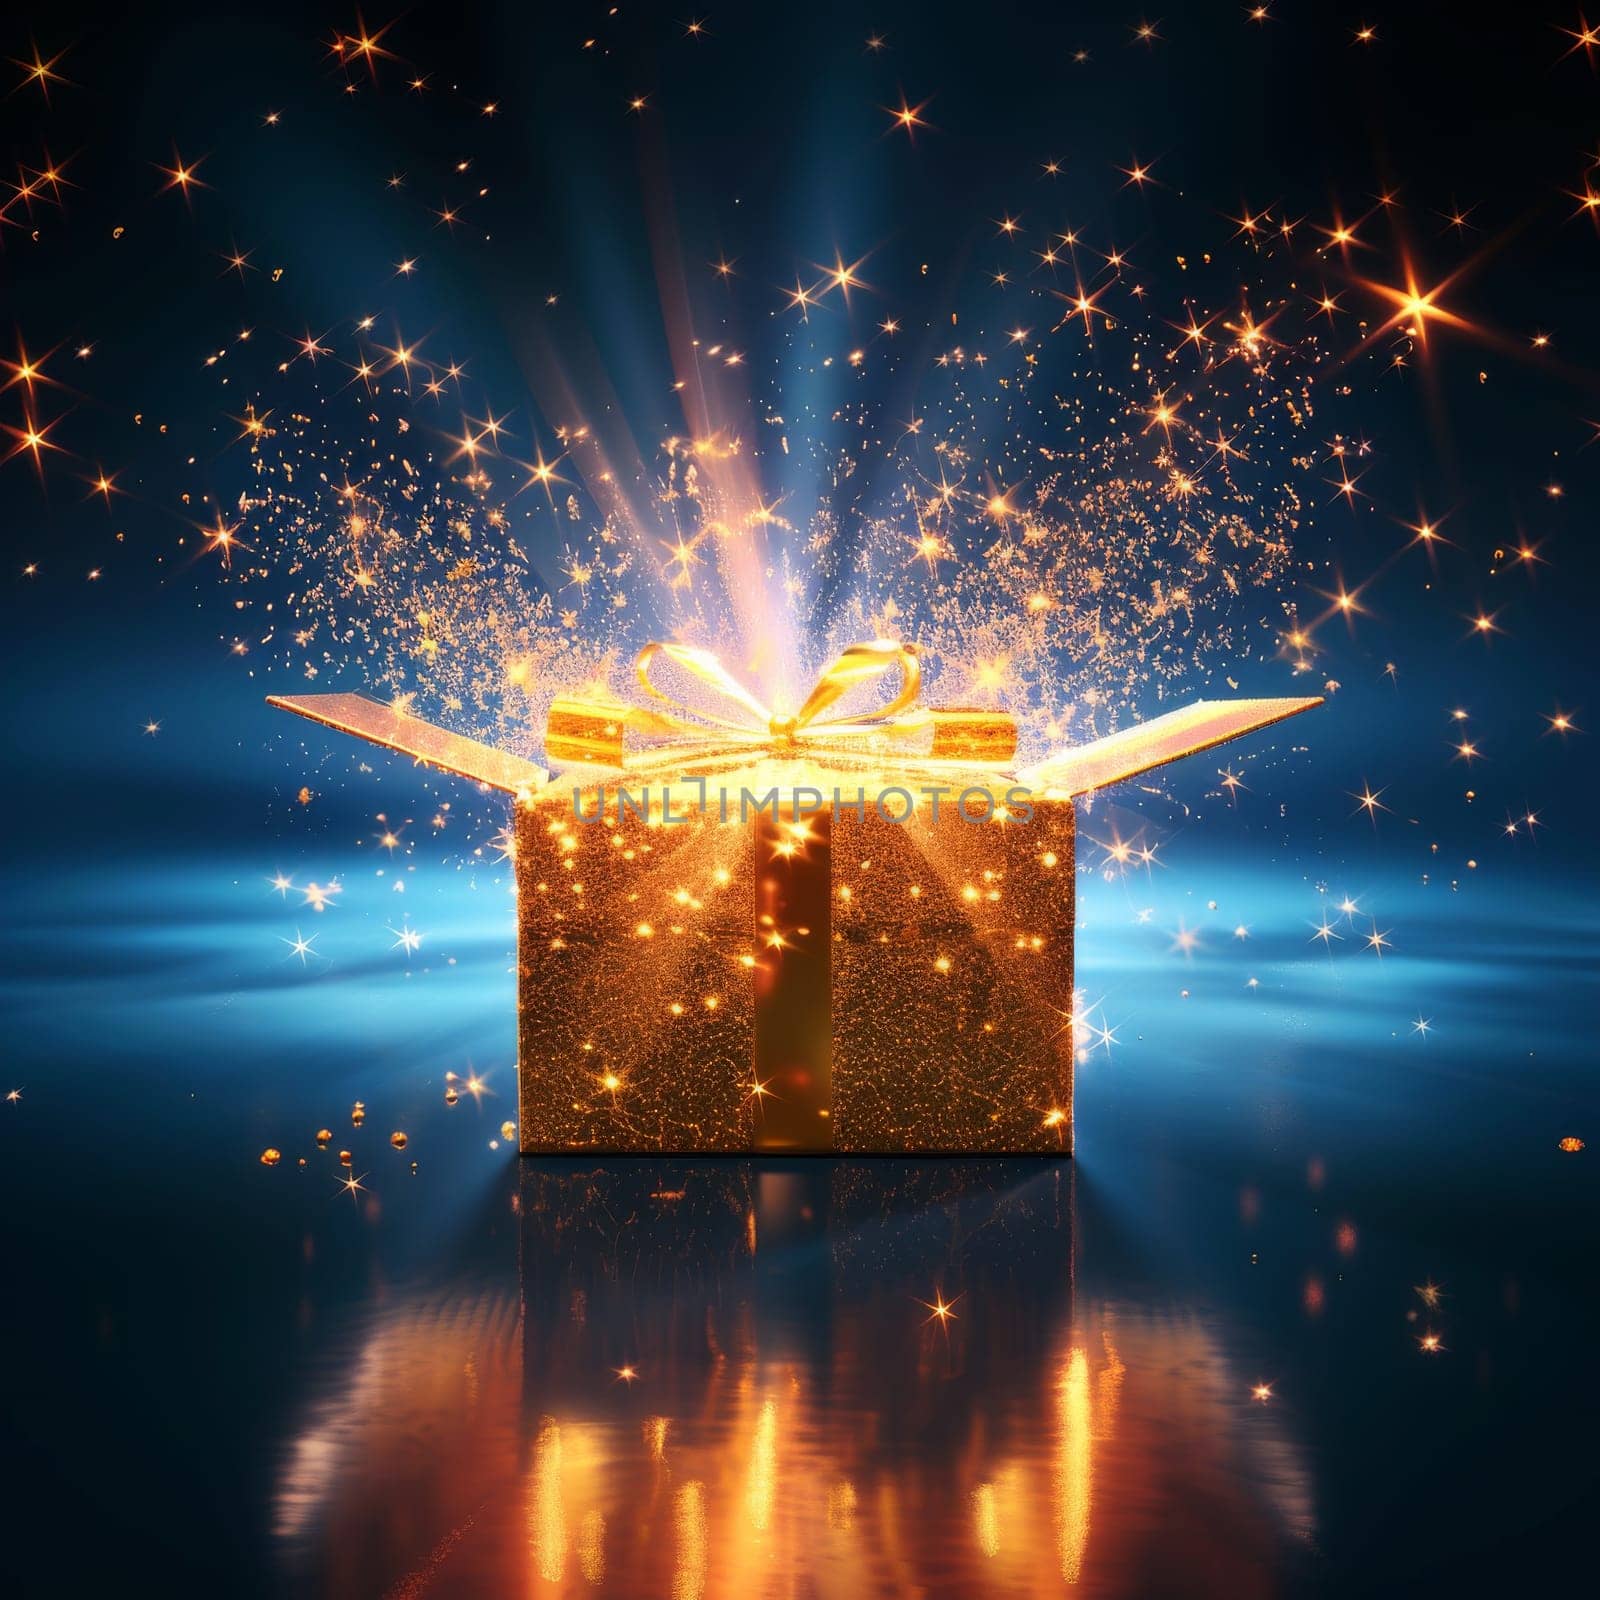 A gold box with a bow on top of it is opened to reveal a glittering surprise. The box is surrounded by a bright blue background, and the glittering effect of the box